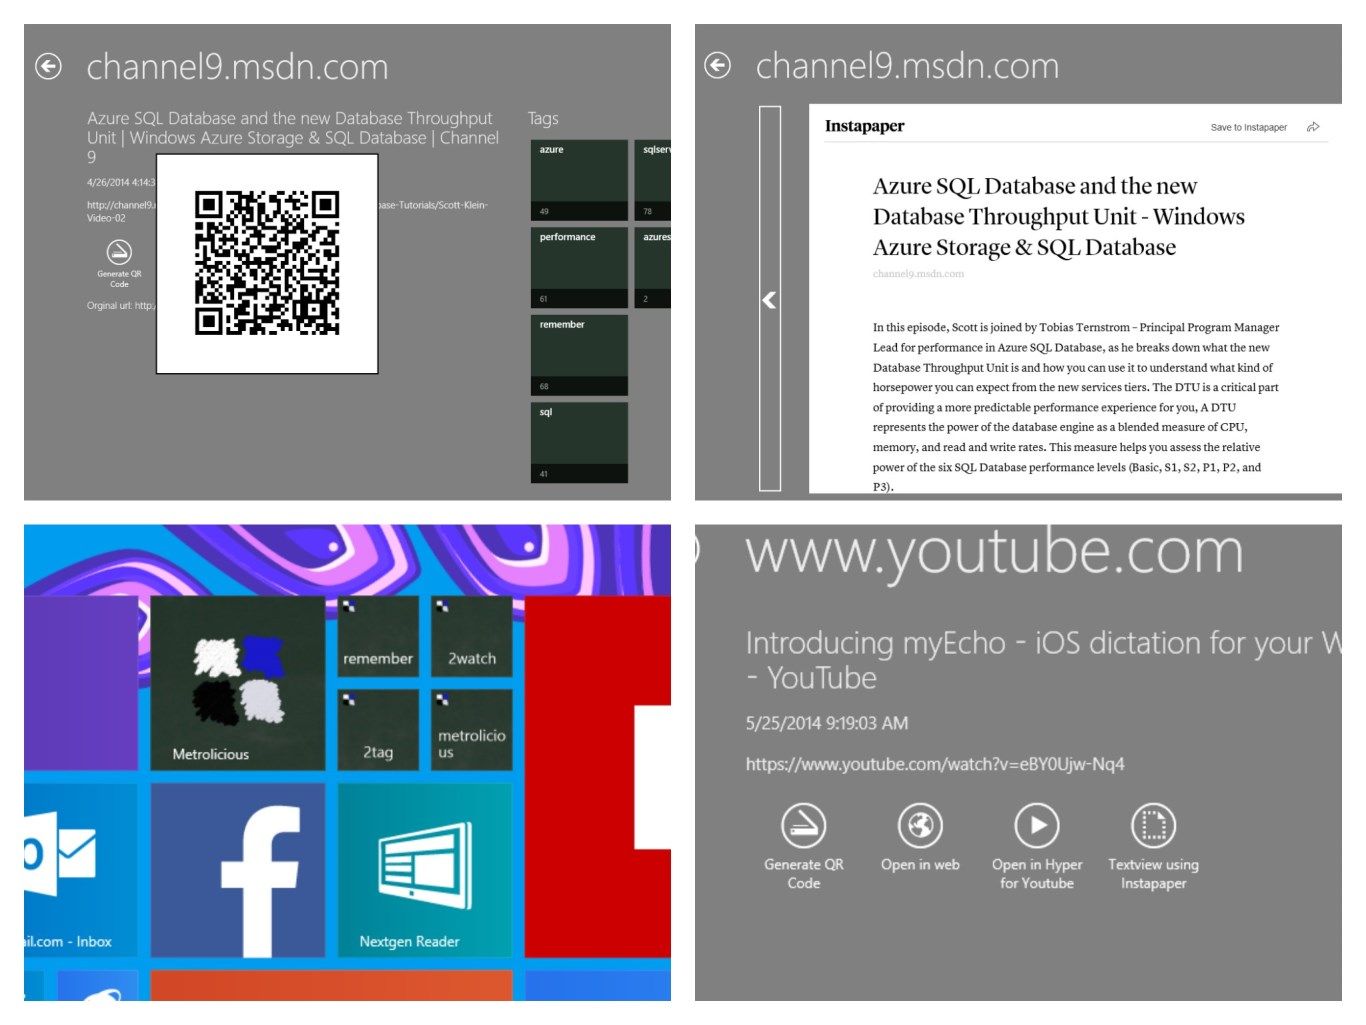 Features added over time: QR code to get the code to your mobile, a quick text view (Win8.1 only), primary live tile + secondary tiles for tags and directly open YouTube videos in Hyper for YouTube.